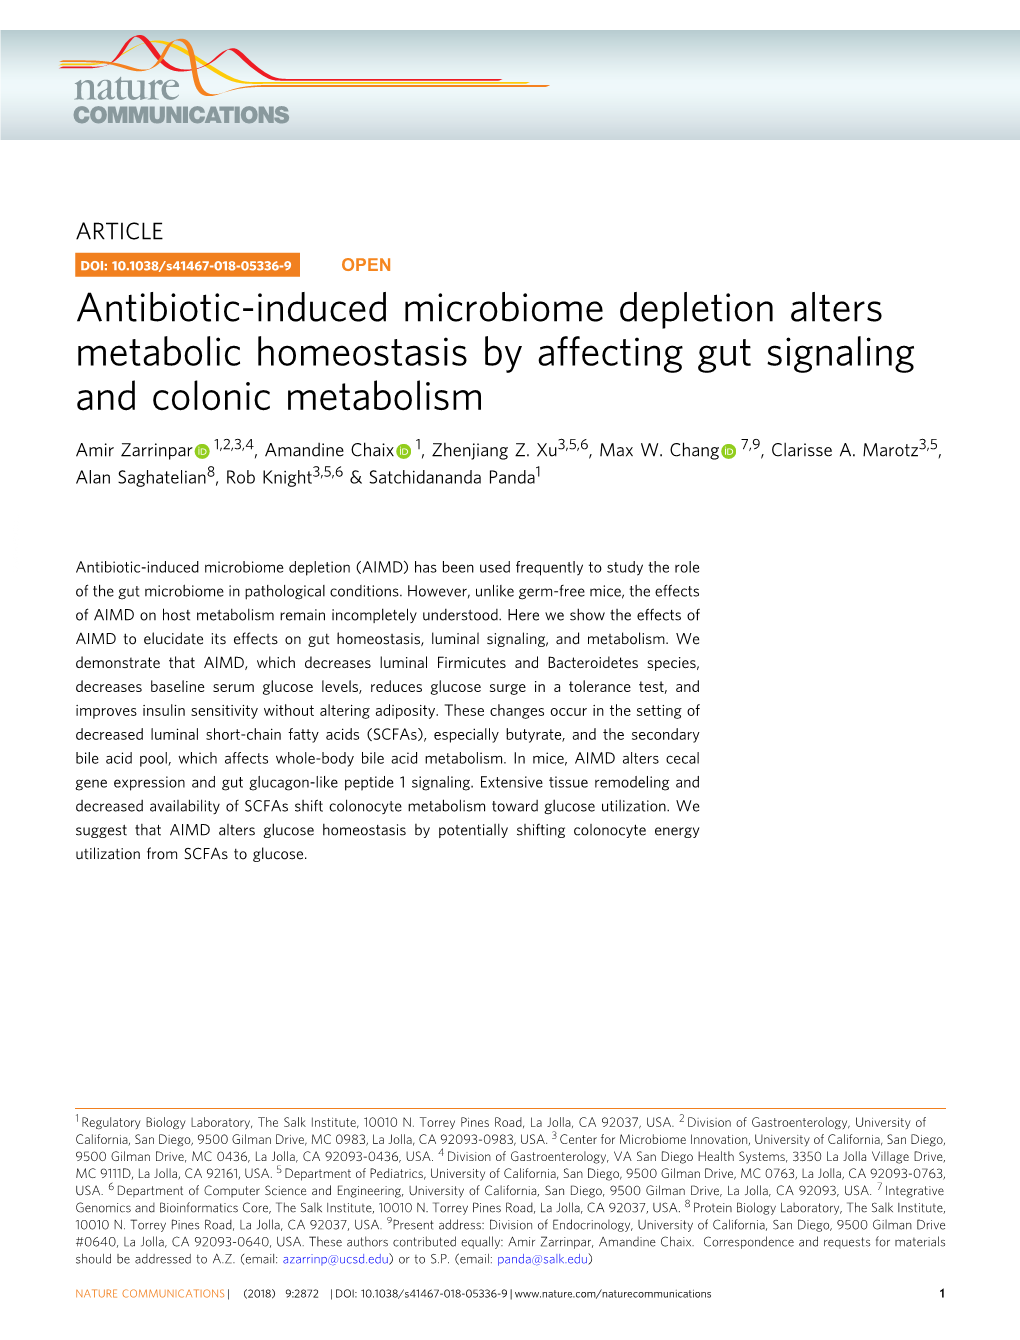 Antibiotic-Induced Microbiome Depletion Alters Metabolic Homeostasis by Affecting Gut Signaling and Colonic Metabolism